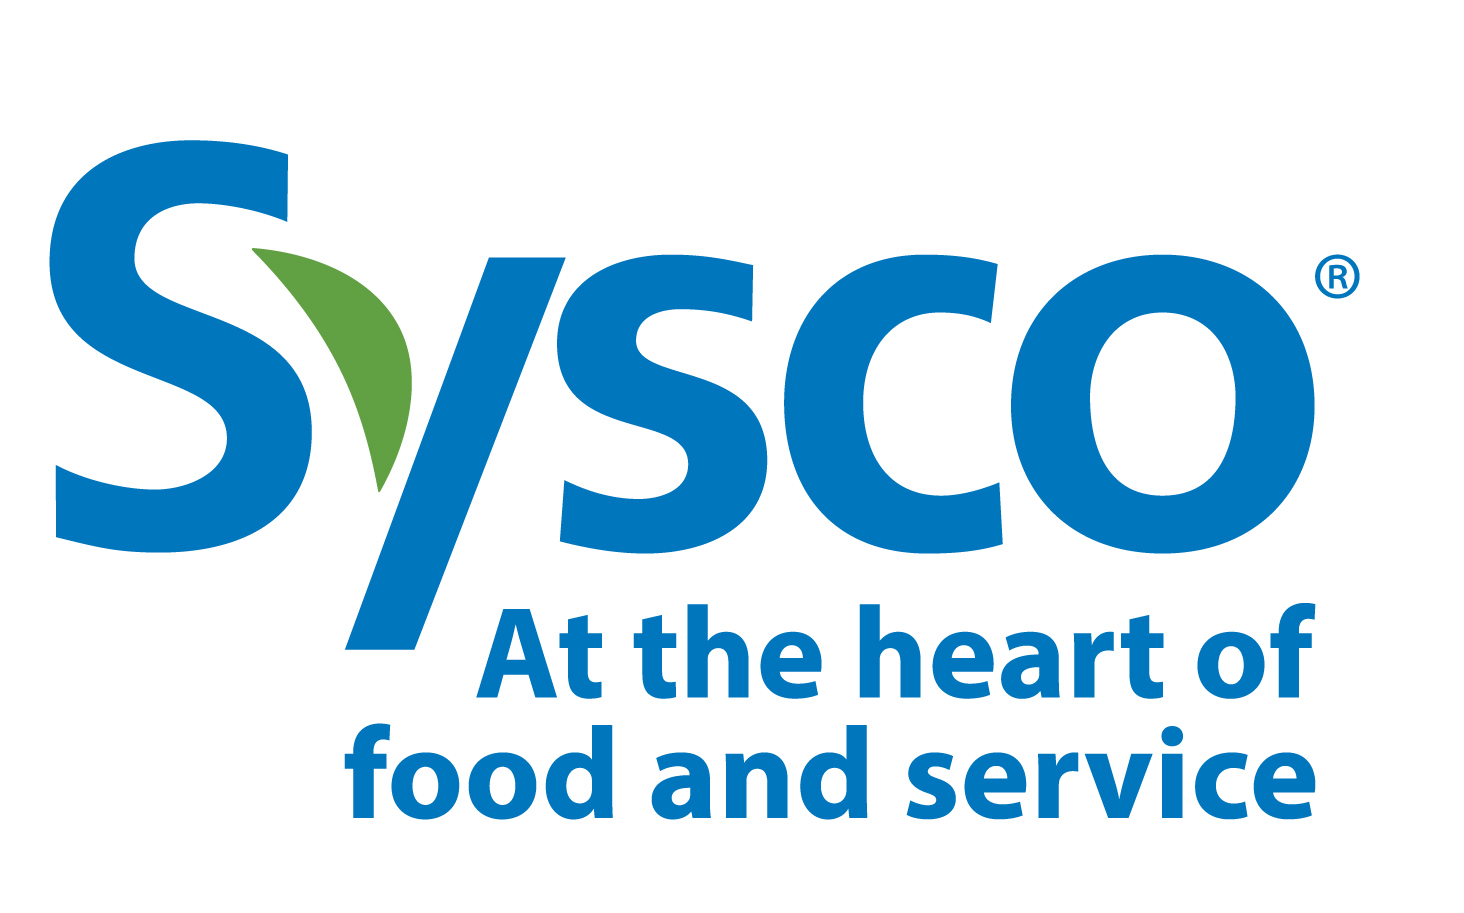 Sysco. At the heart of food and service